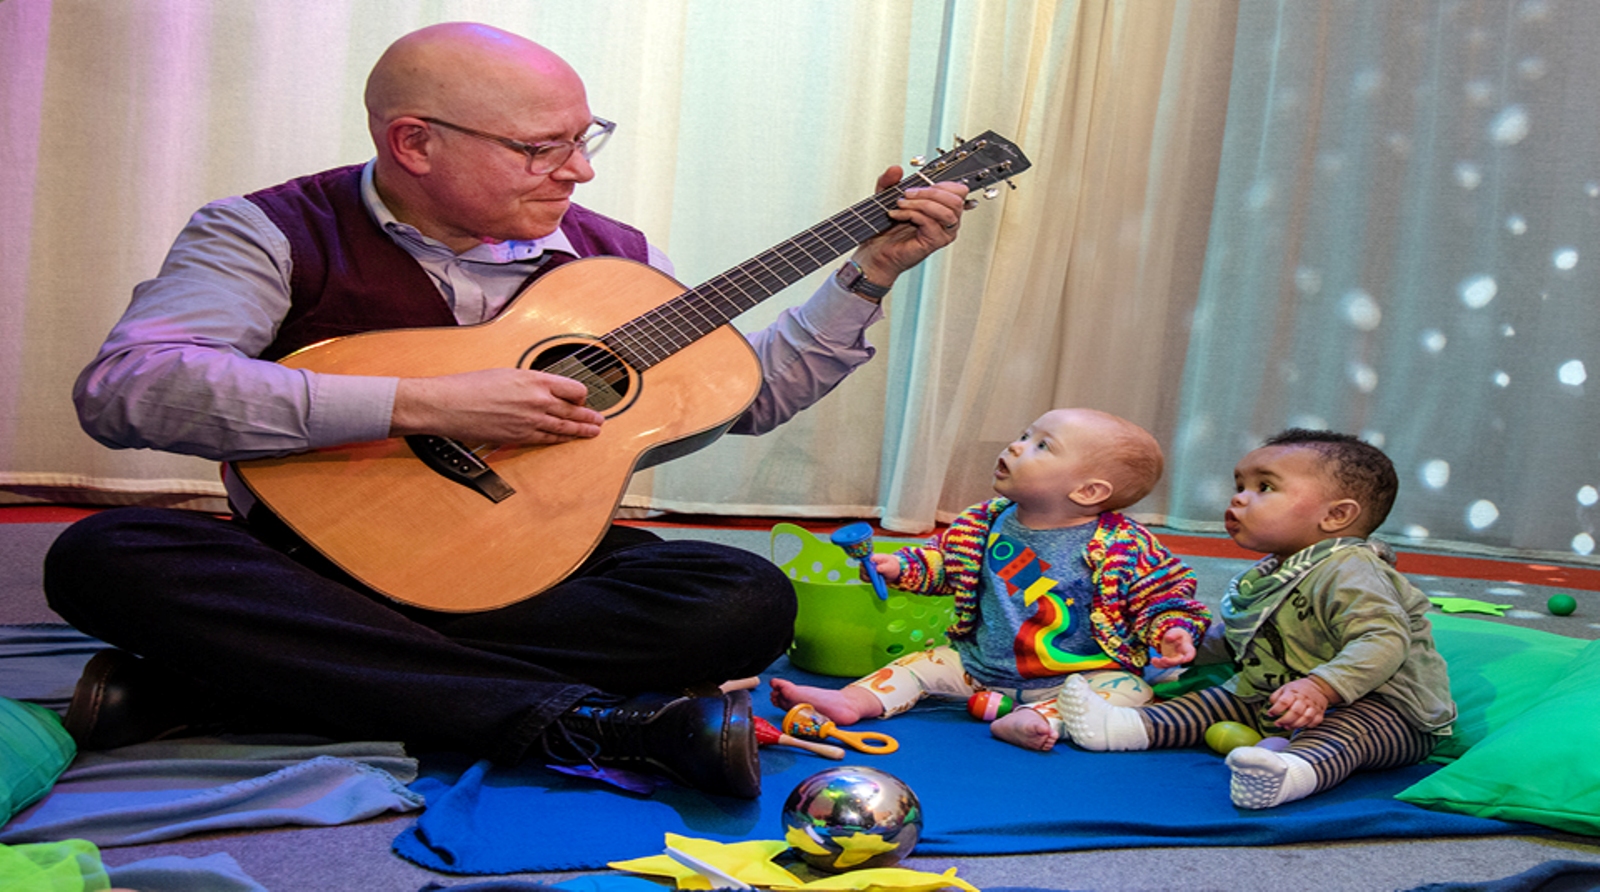 Man sat down playing his guitar to two toddlers